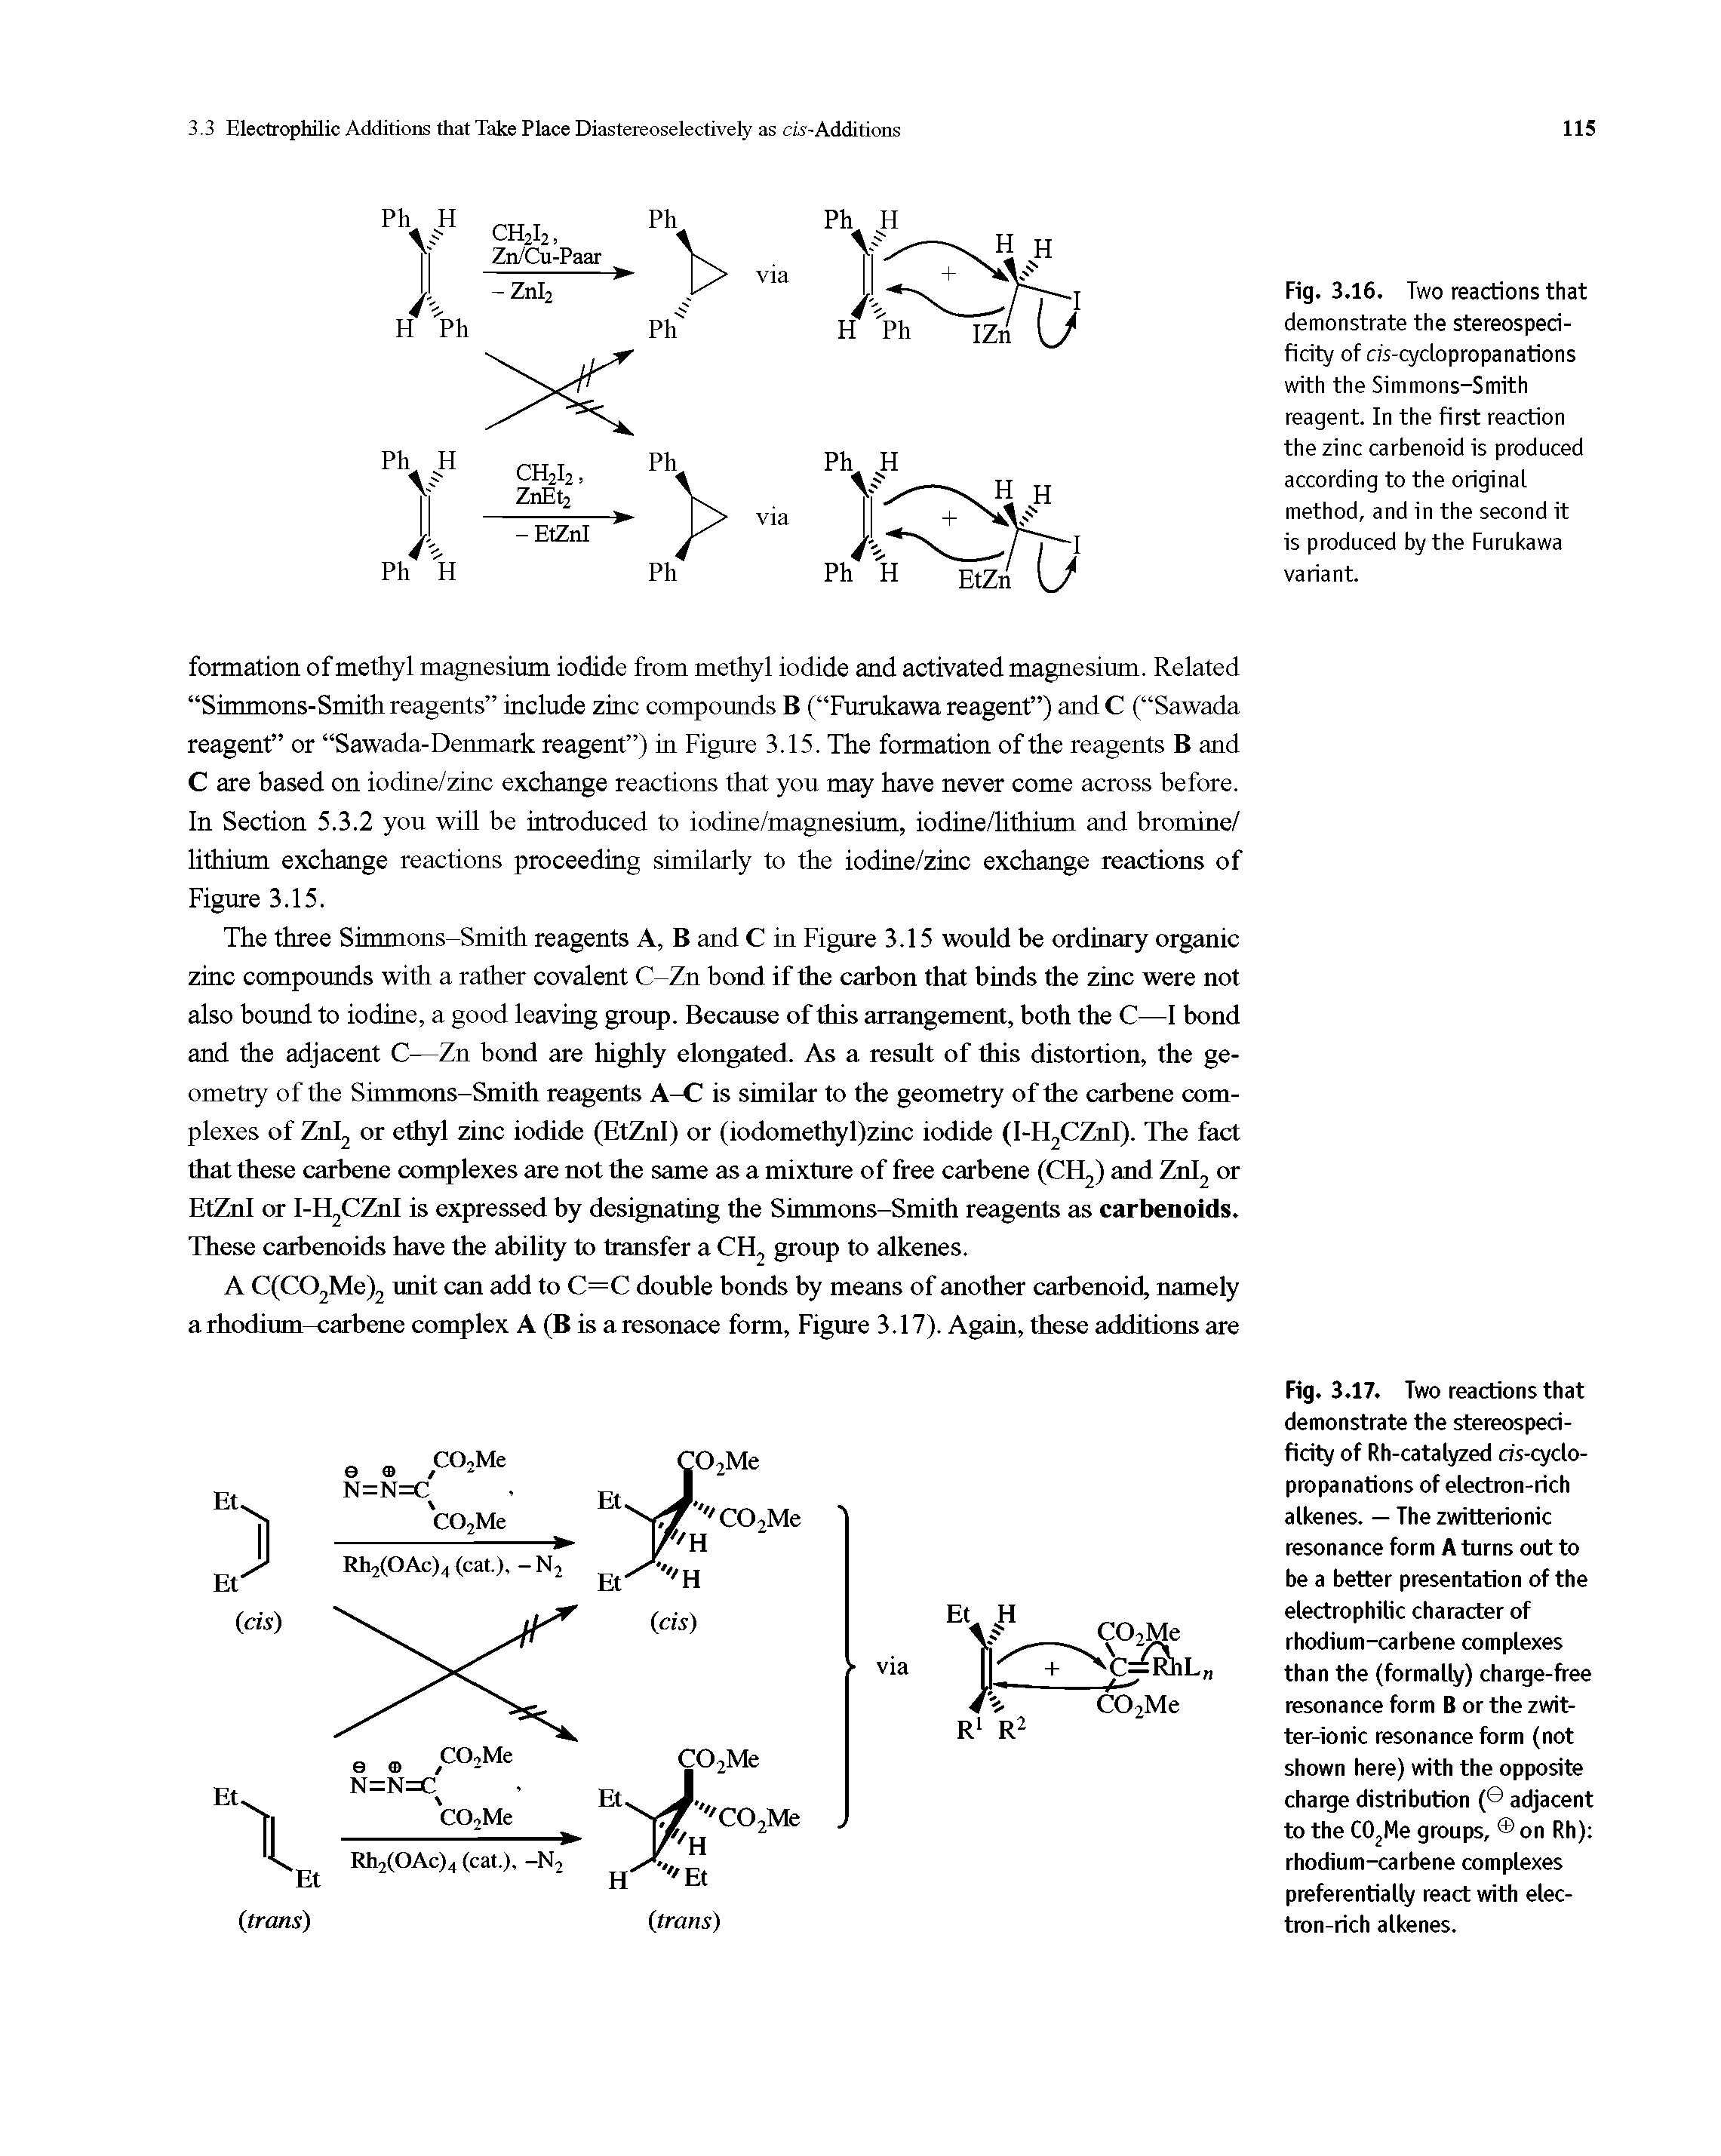 Fig. 3.17. Two reactions that demonstrate the stereospecificity of Rh-catalyzed cis-cyclo-propanations of electron-rich alkenes. — The zwitterionic resonance form A turns out to be a better presentation of the electrophilic character of rhodium-carbene complexes than the (formally) charge-free resonance form B or the zwit-ter-ionic resonance form (not shown here) with the opposite charge distribution ( adjacent to the C02Me groups, on Rh) rhodium-carbene complexes preferentially react with electron-rich alkenes.